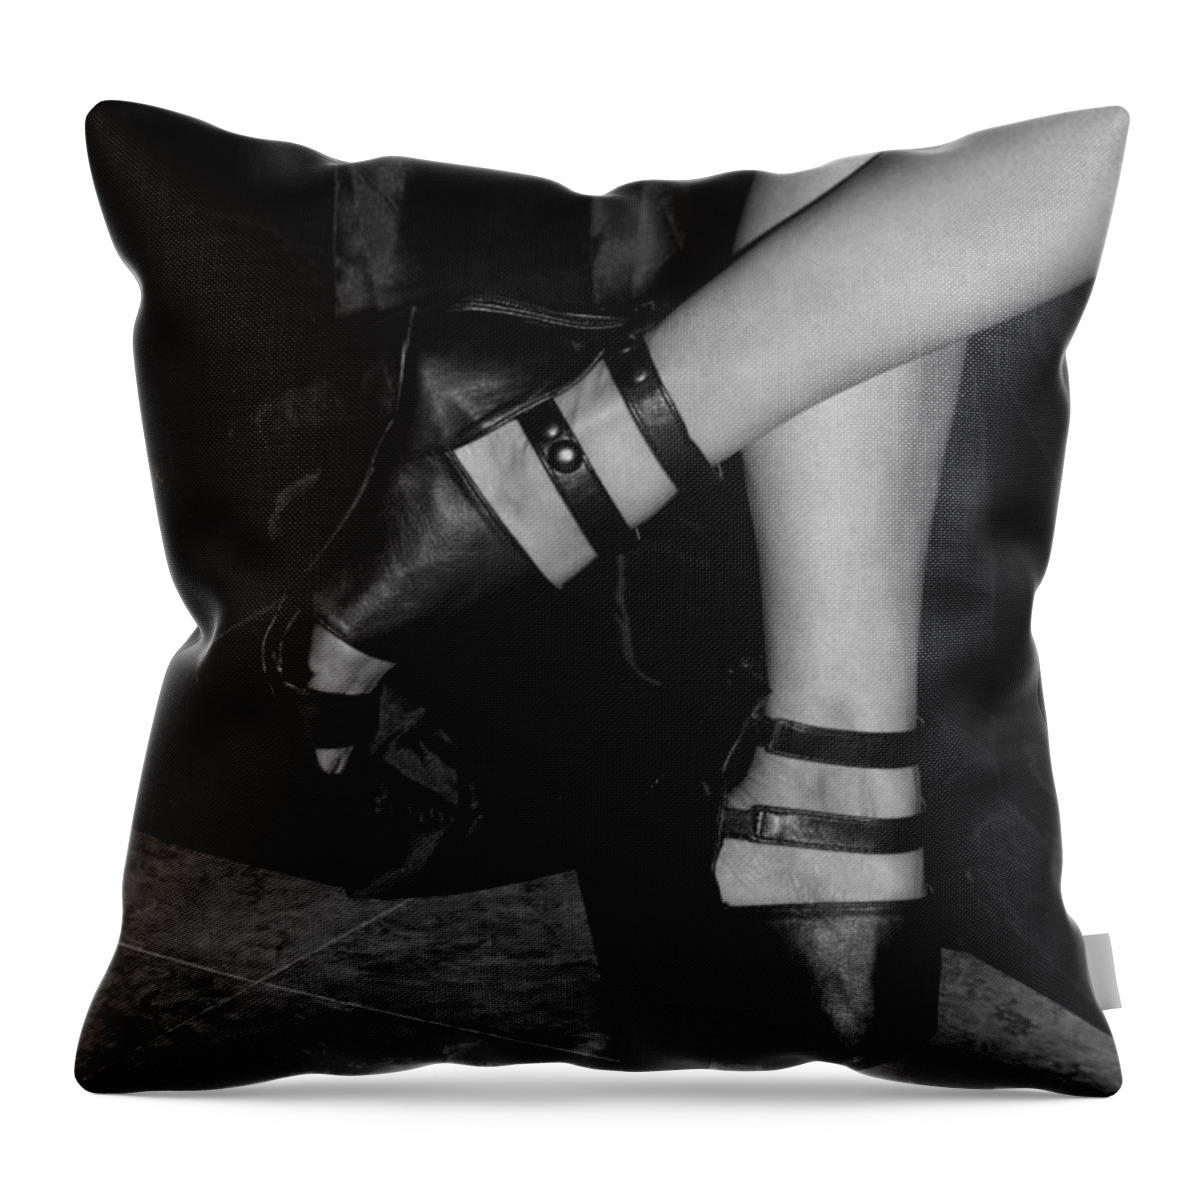 Abstract Throw Pillow featuring the photograph Stepping Out by Ester McGuire